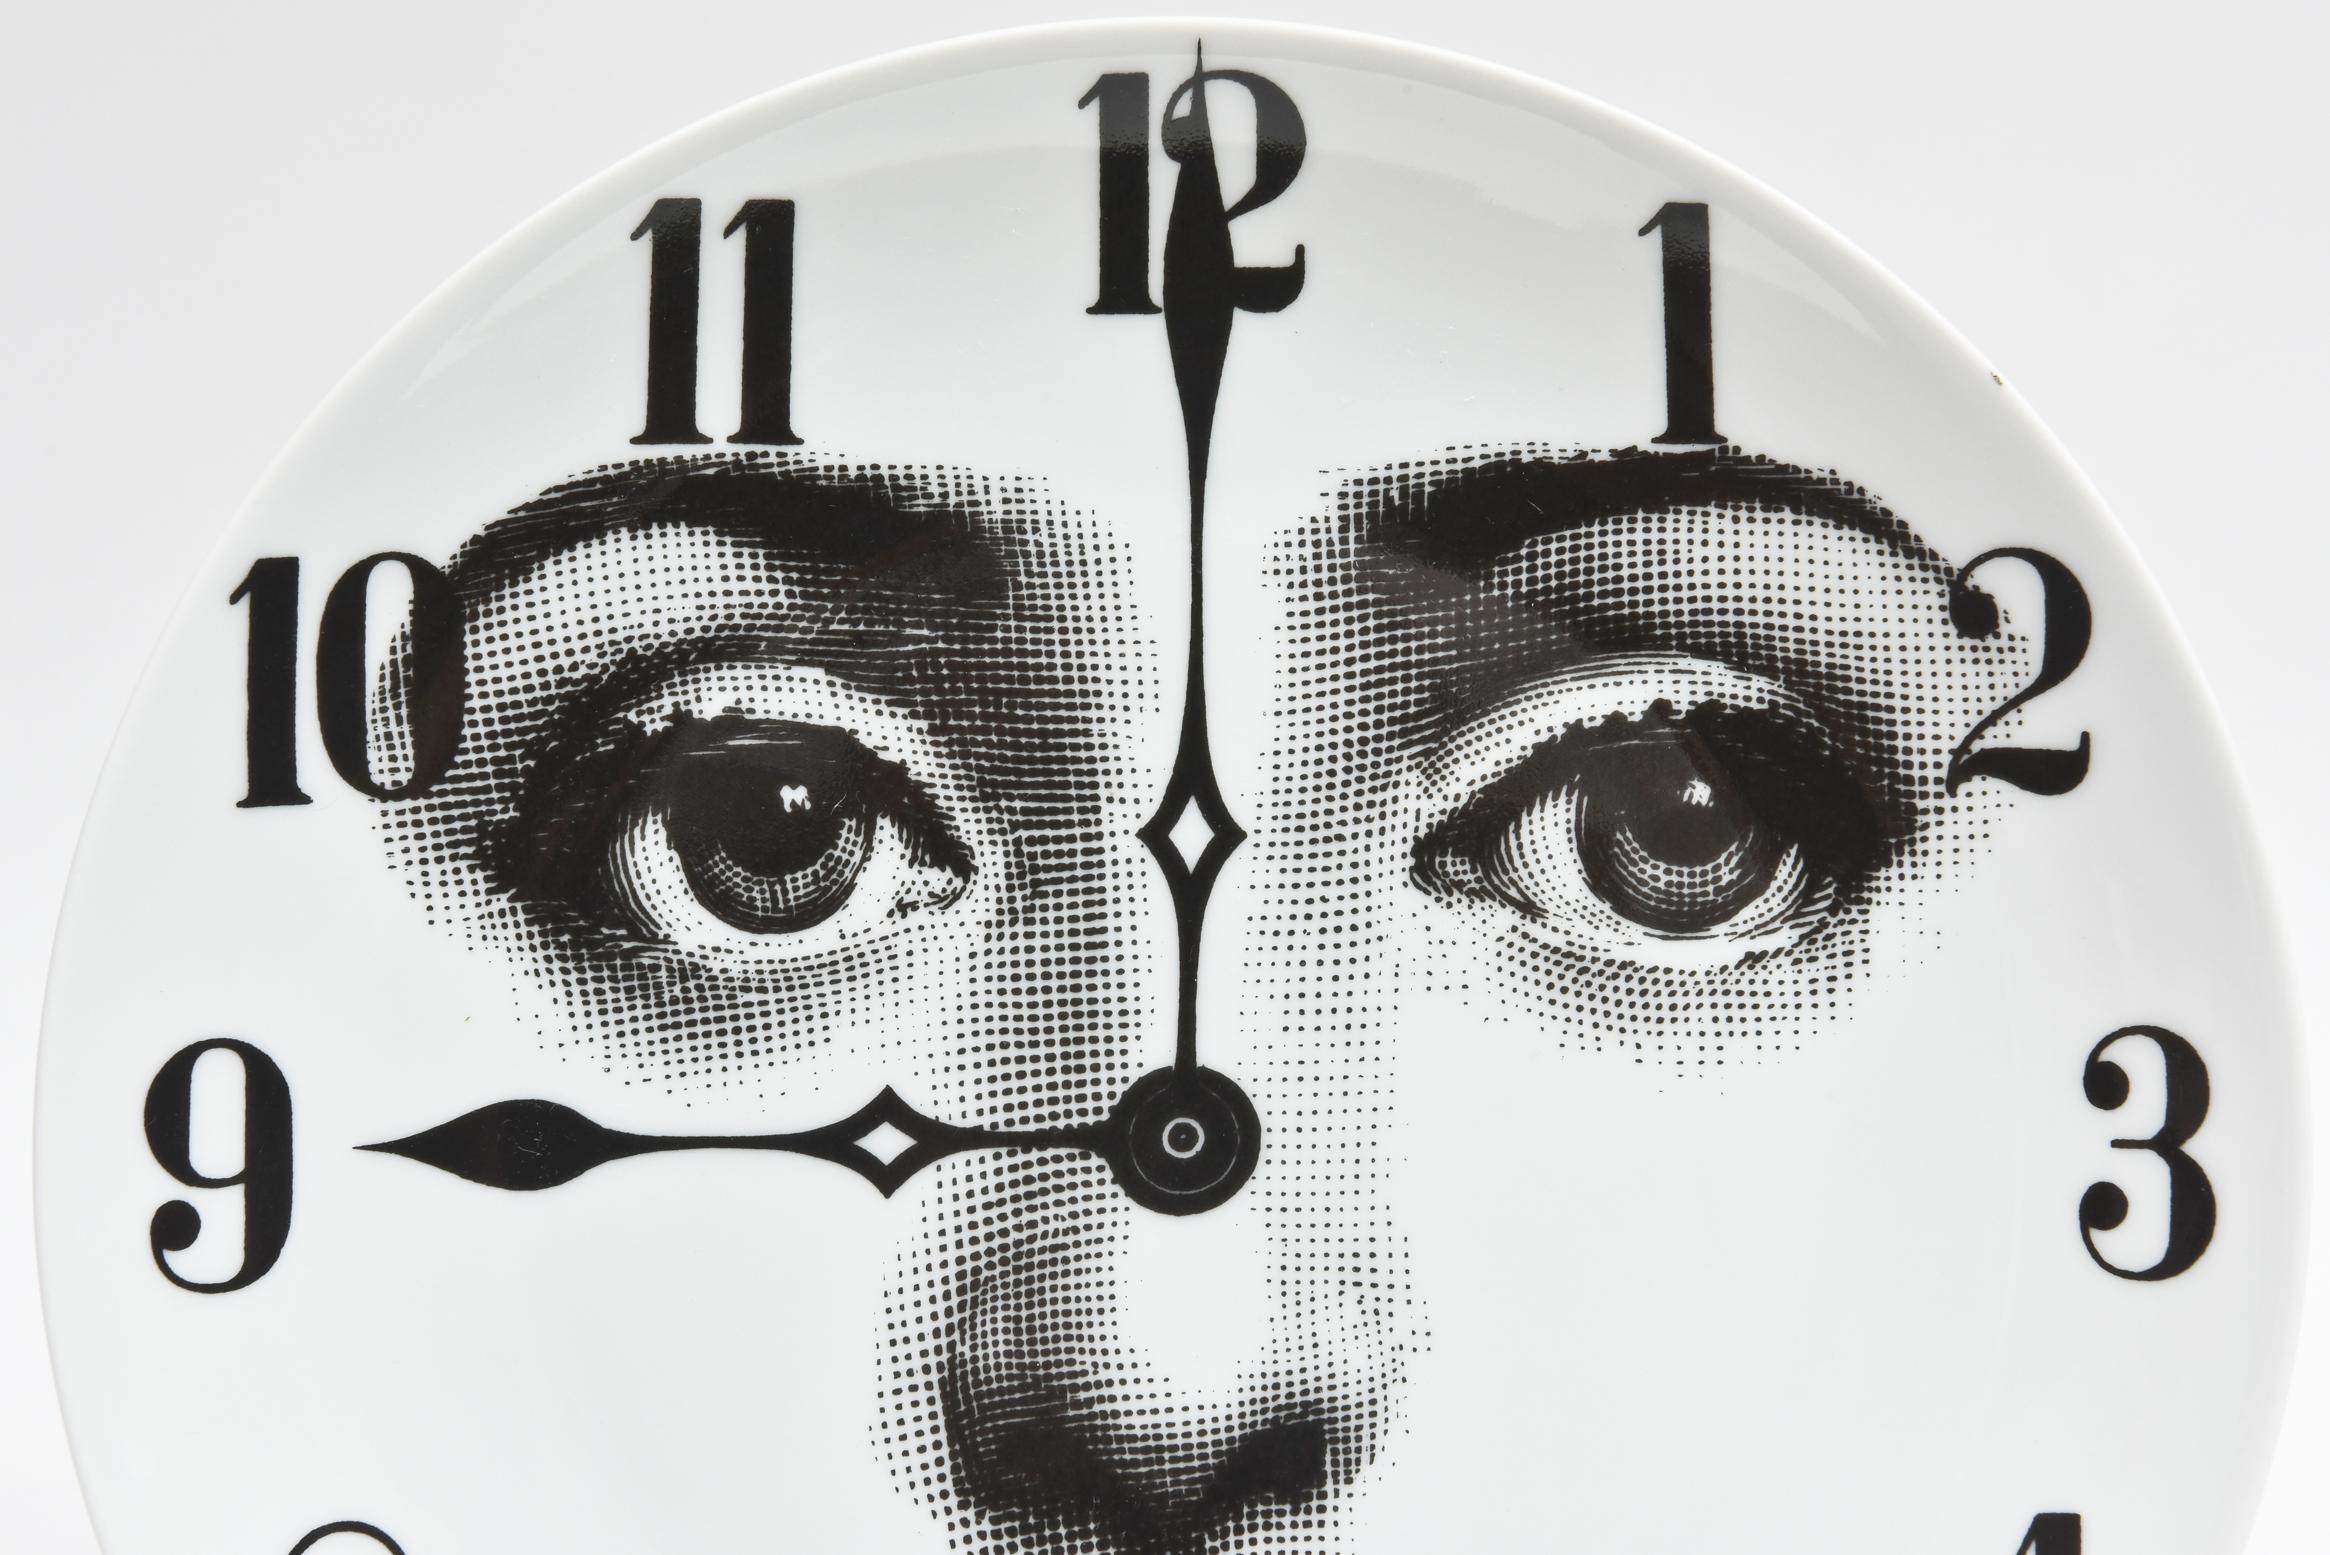 A Classic midcentury Italian Designed plate featuring an iconic image from Piero Fornasetti’s work, his muse the opera singer, Lina Cavalieri. Crisp black and white timeless design in very good vintage condition.